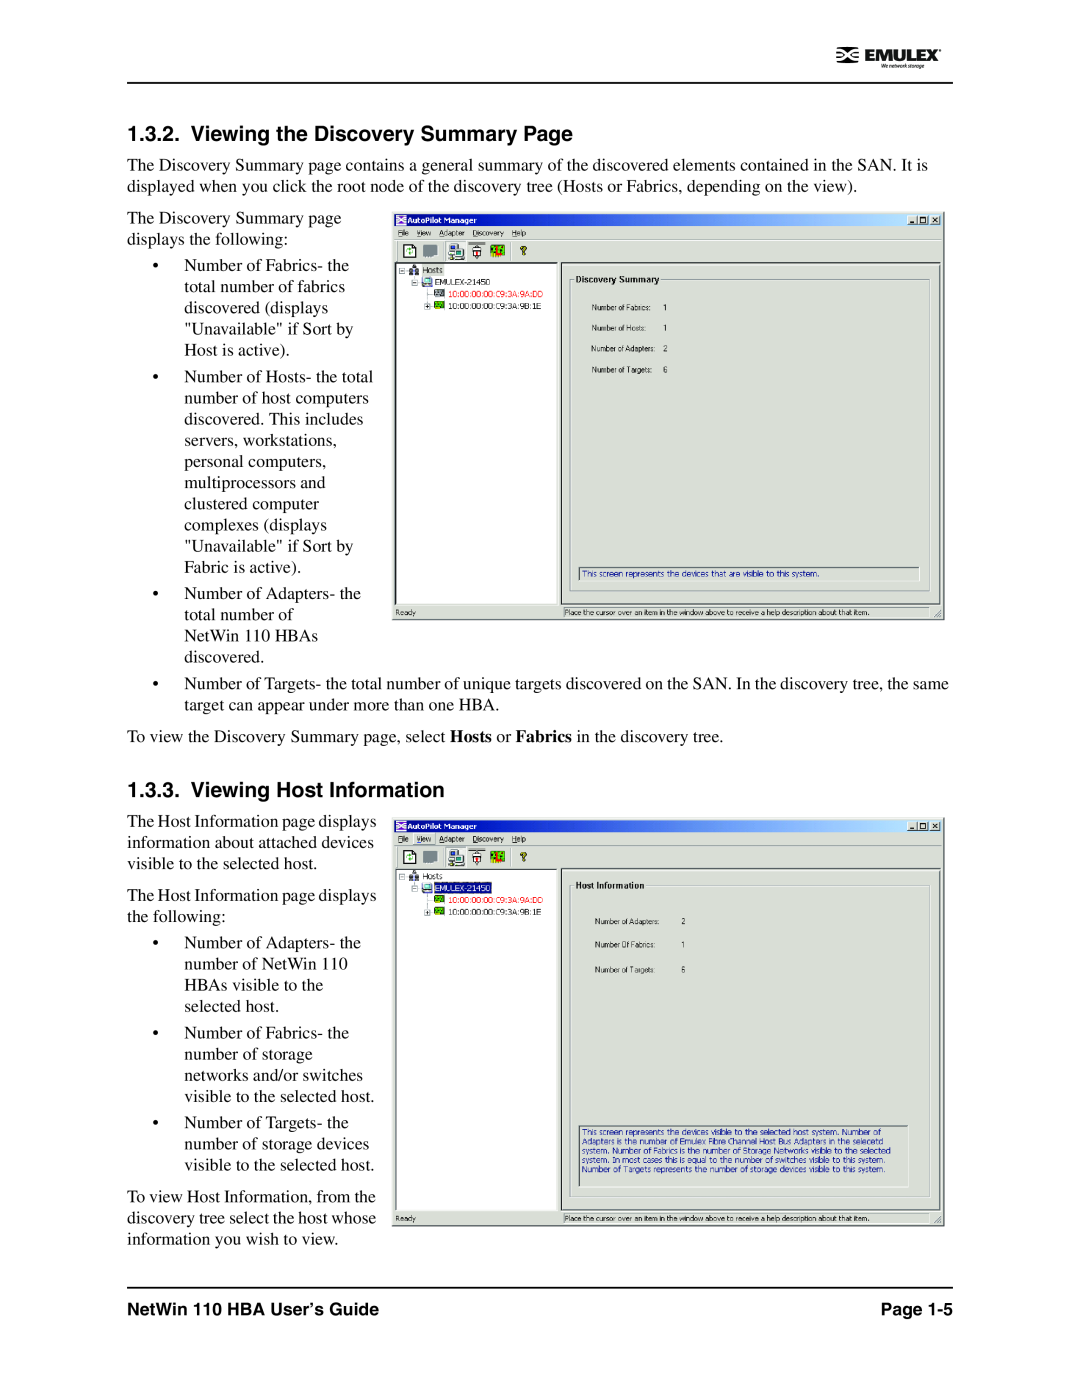 Emulex manual Viewing the Discovery Summary Page, Viewing Host Information, NetWin 110 HBA User’s Guide 